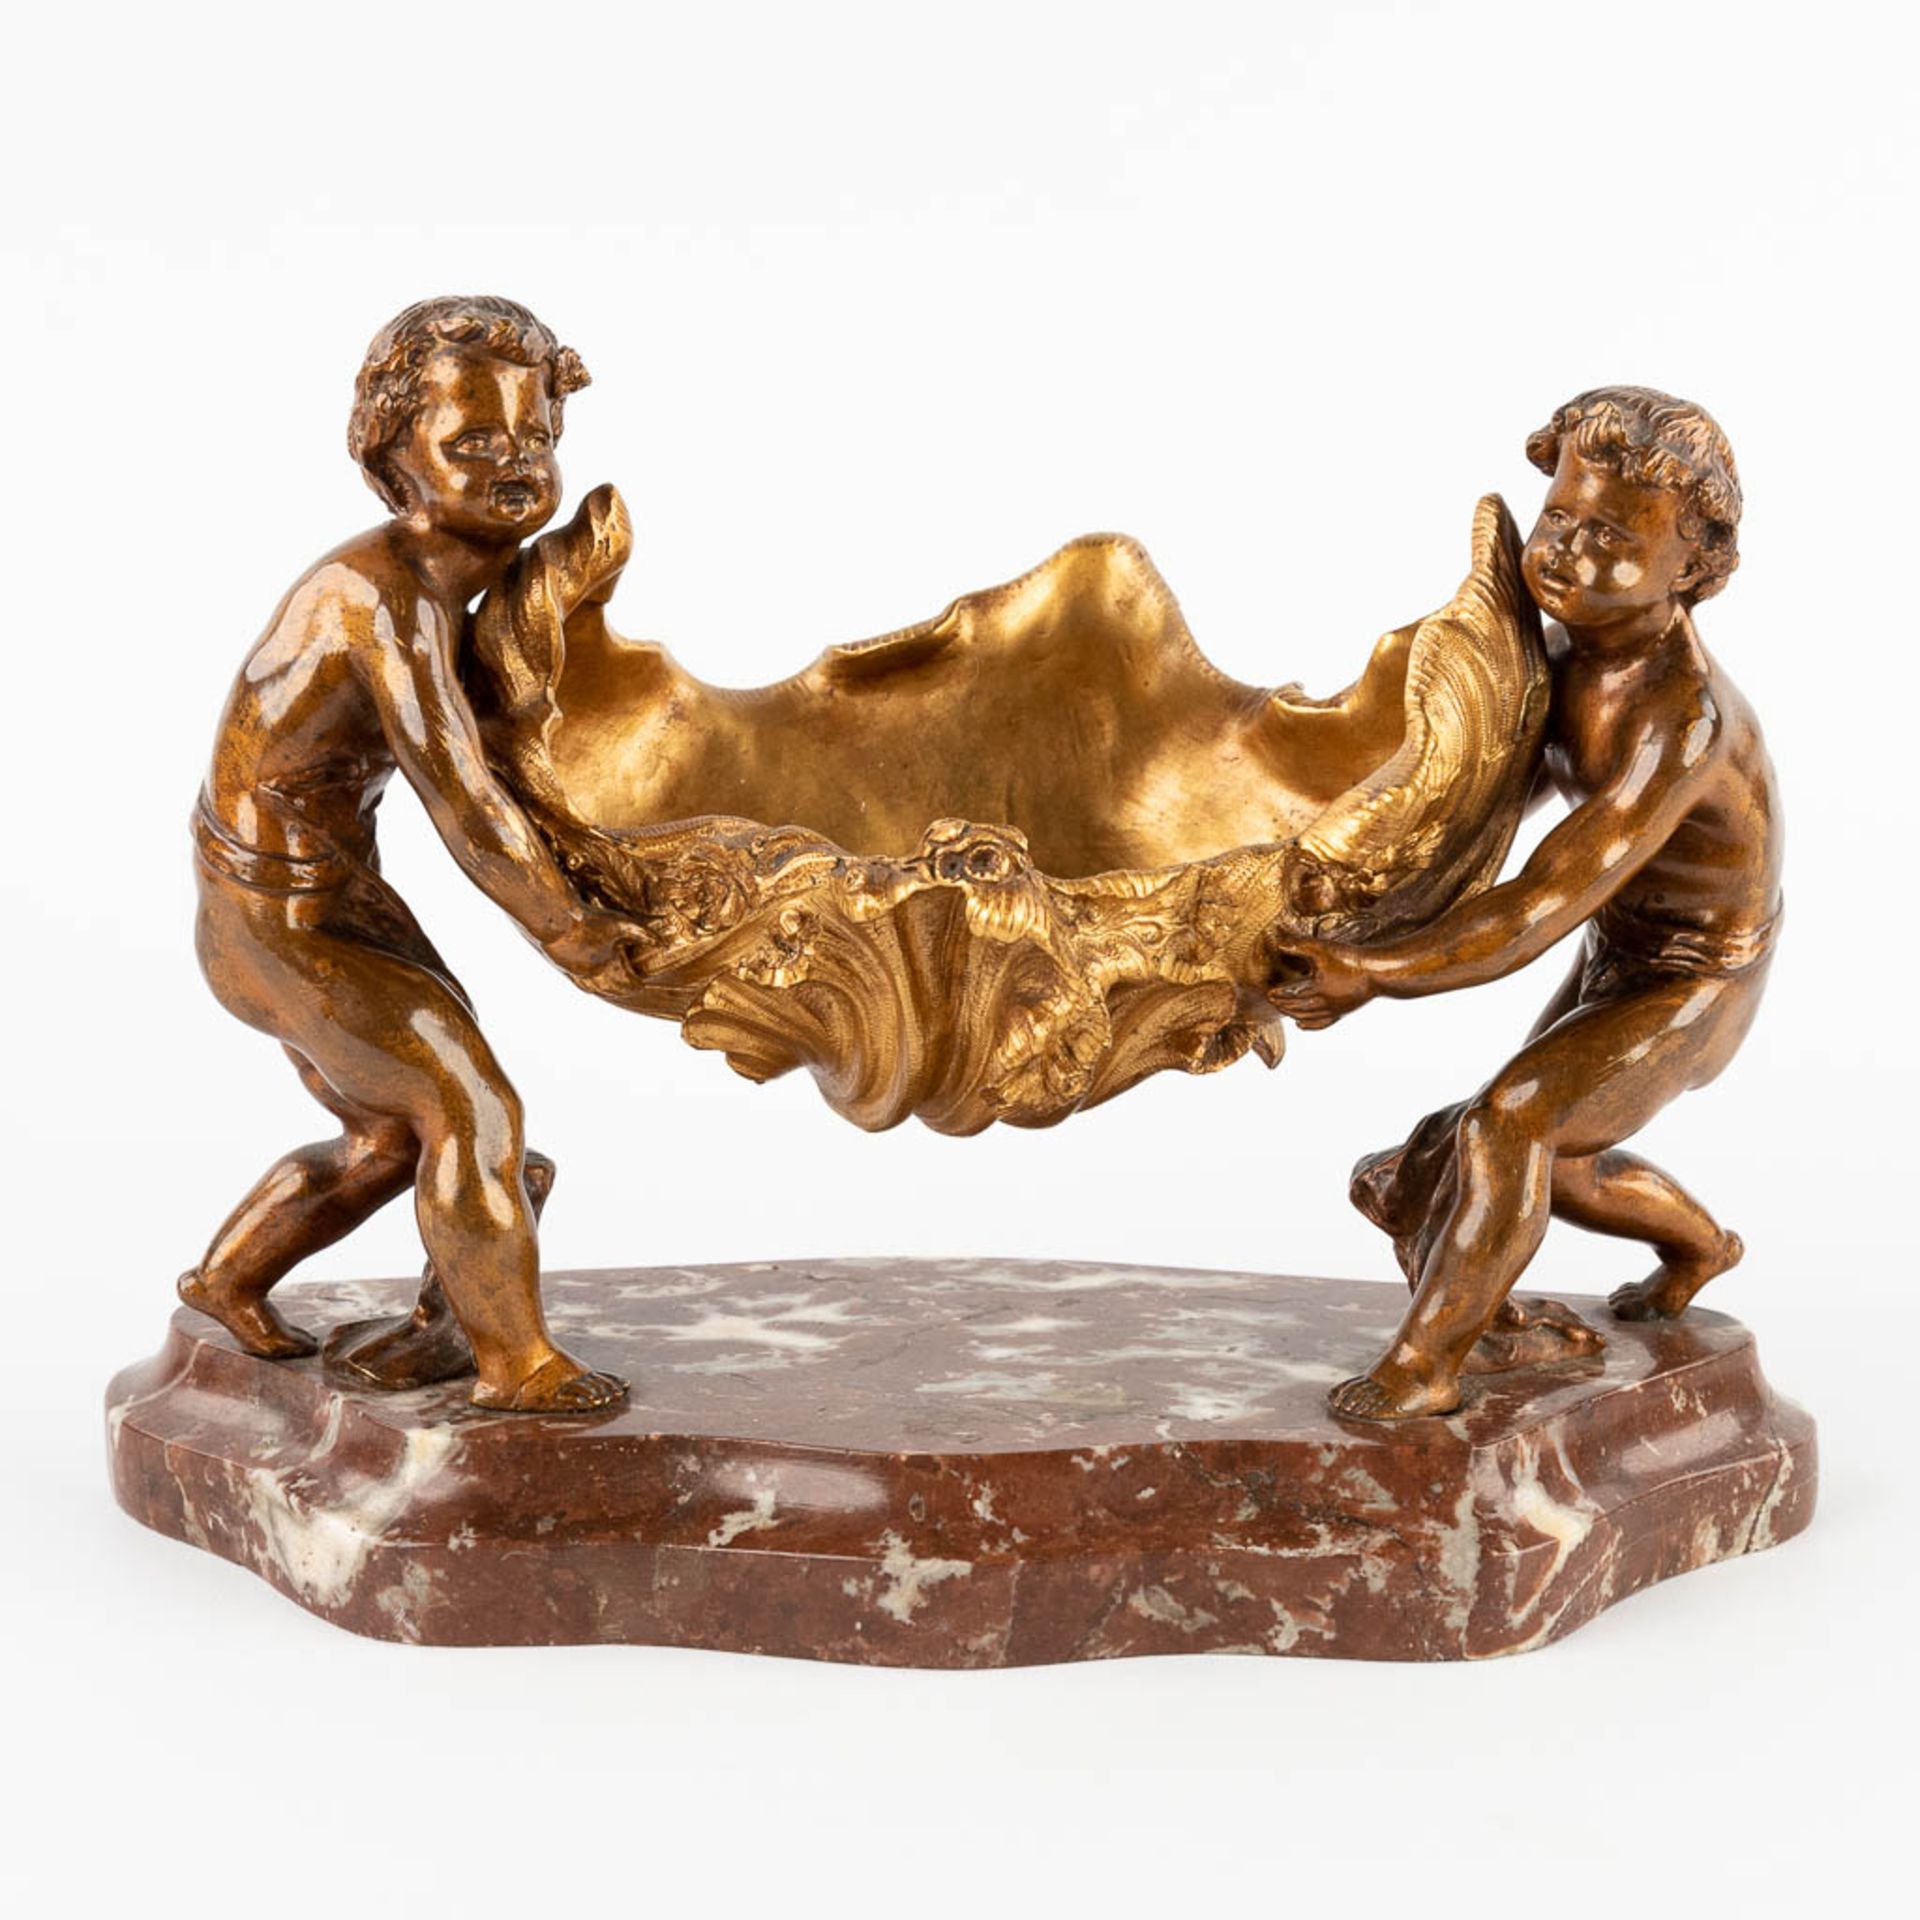 Two Putti with a sea shell, Vide Poche, Louis XV style, bronze mounted on marble. 19th C. (D:13 x W: